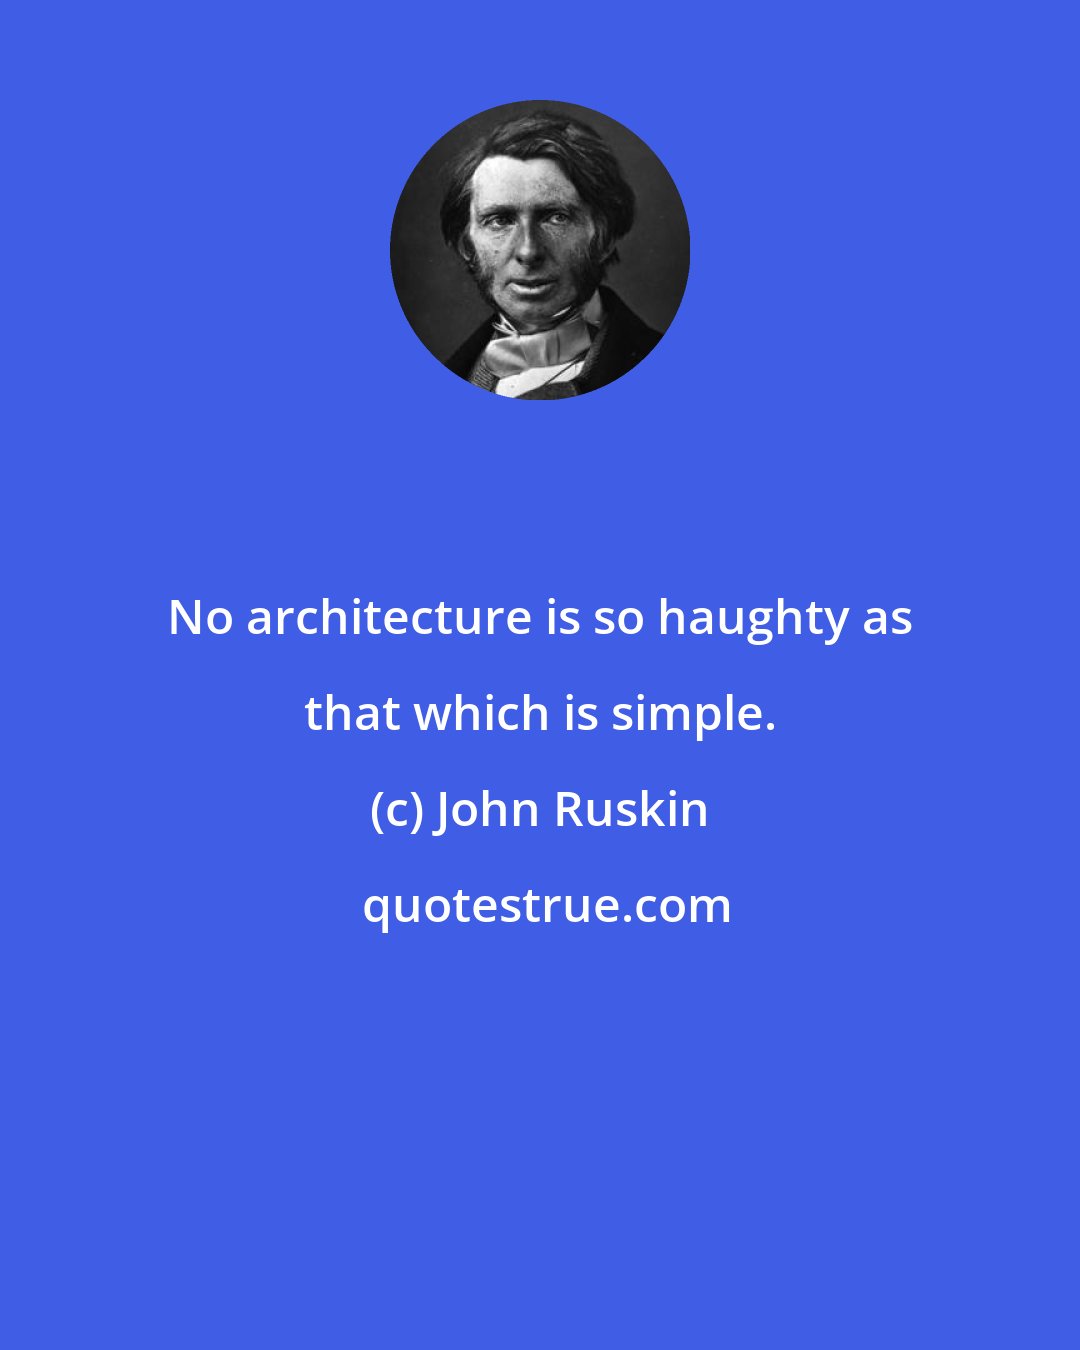 John Ruskin: No architecture is so haughty as that which is simple.